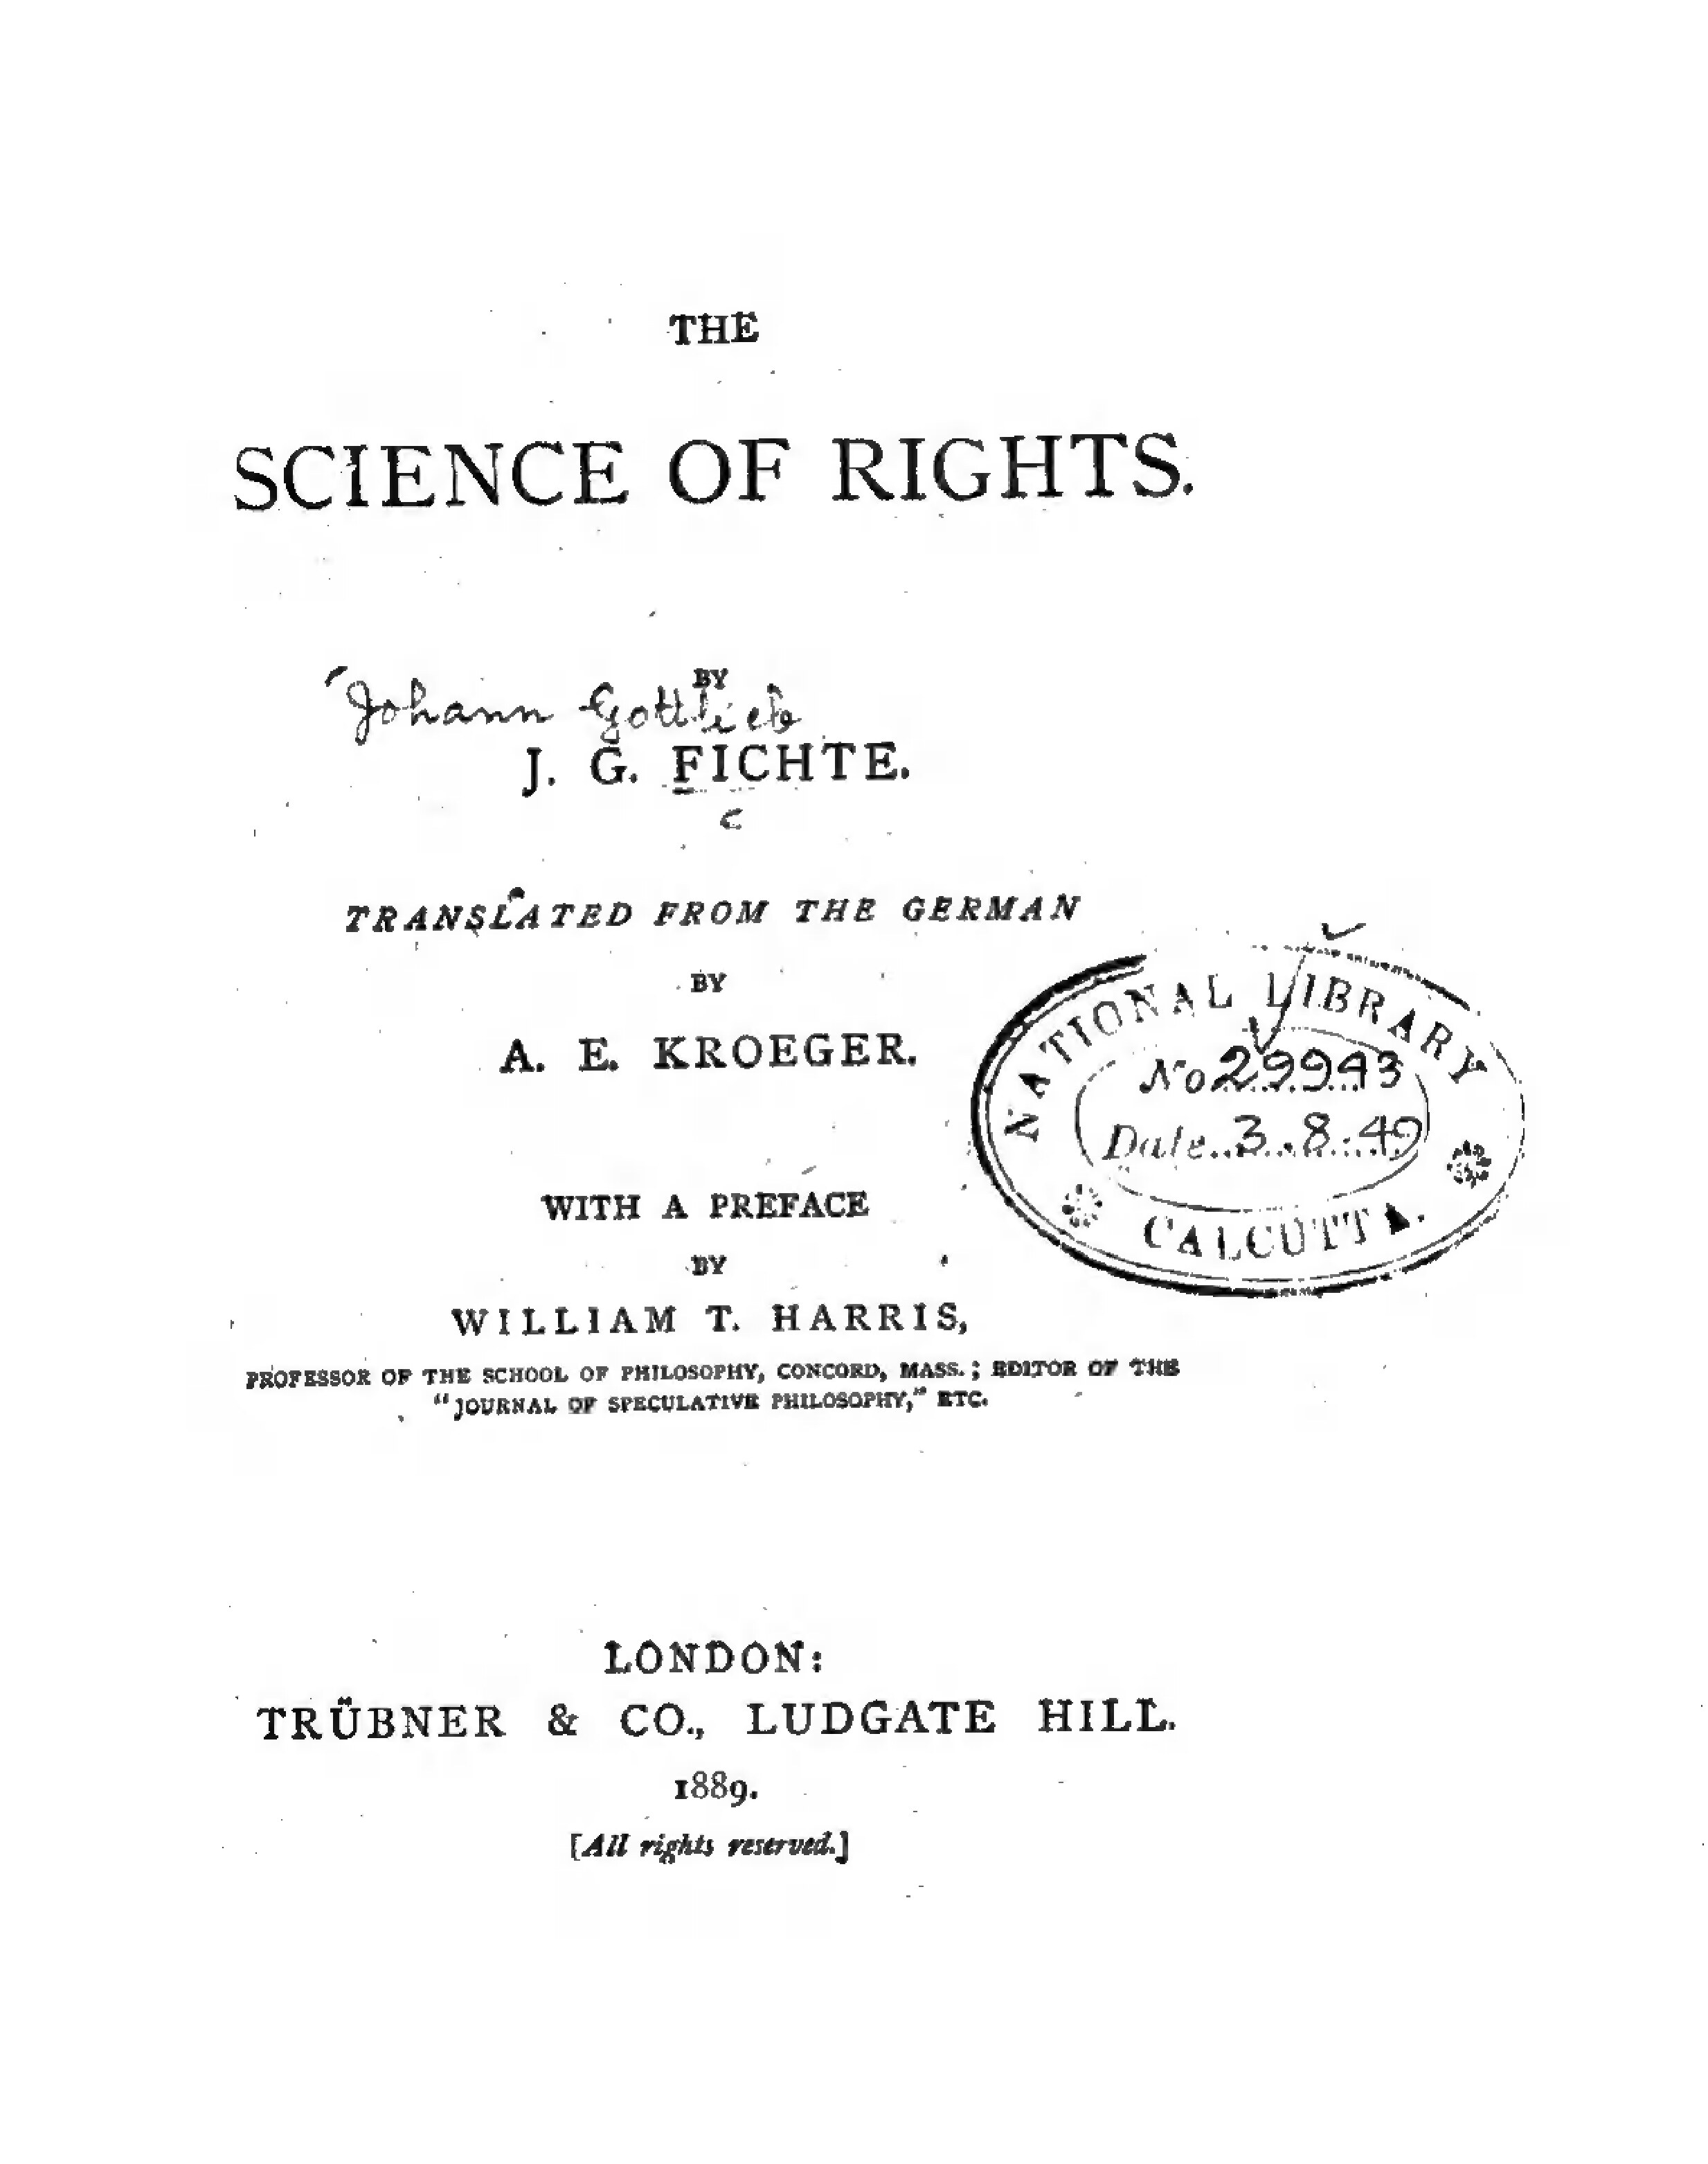 The science of rights